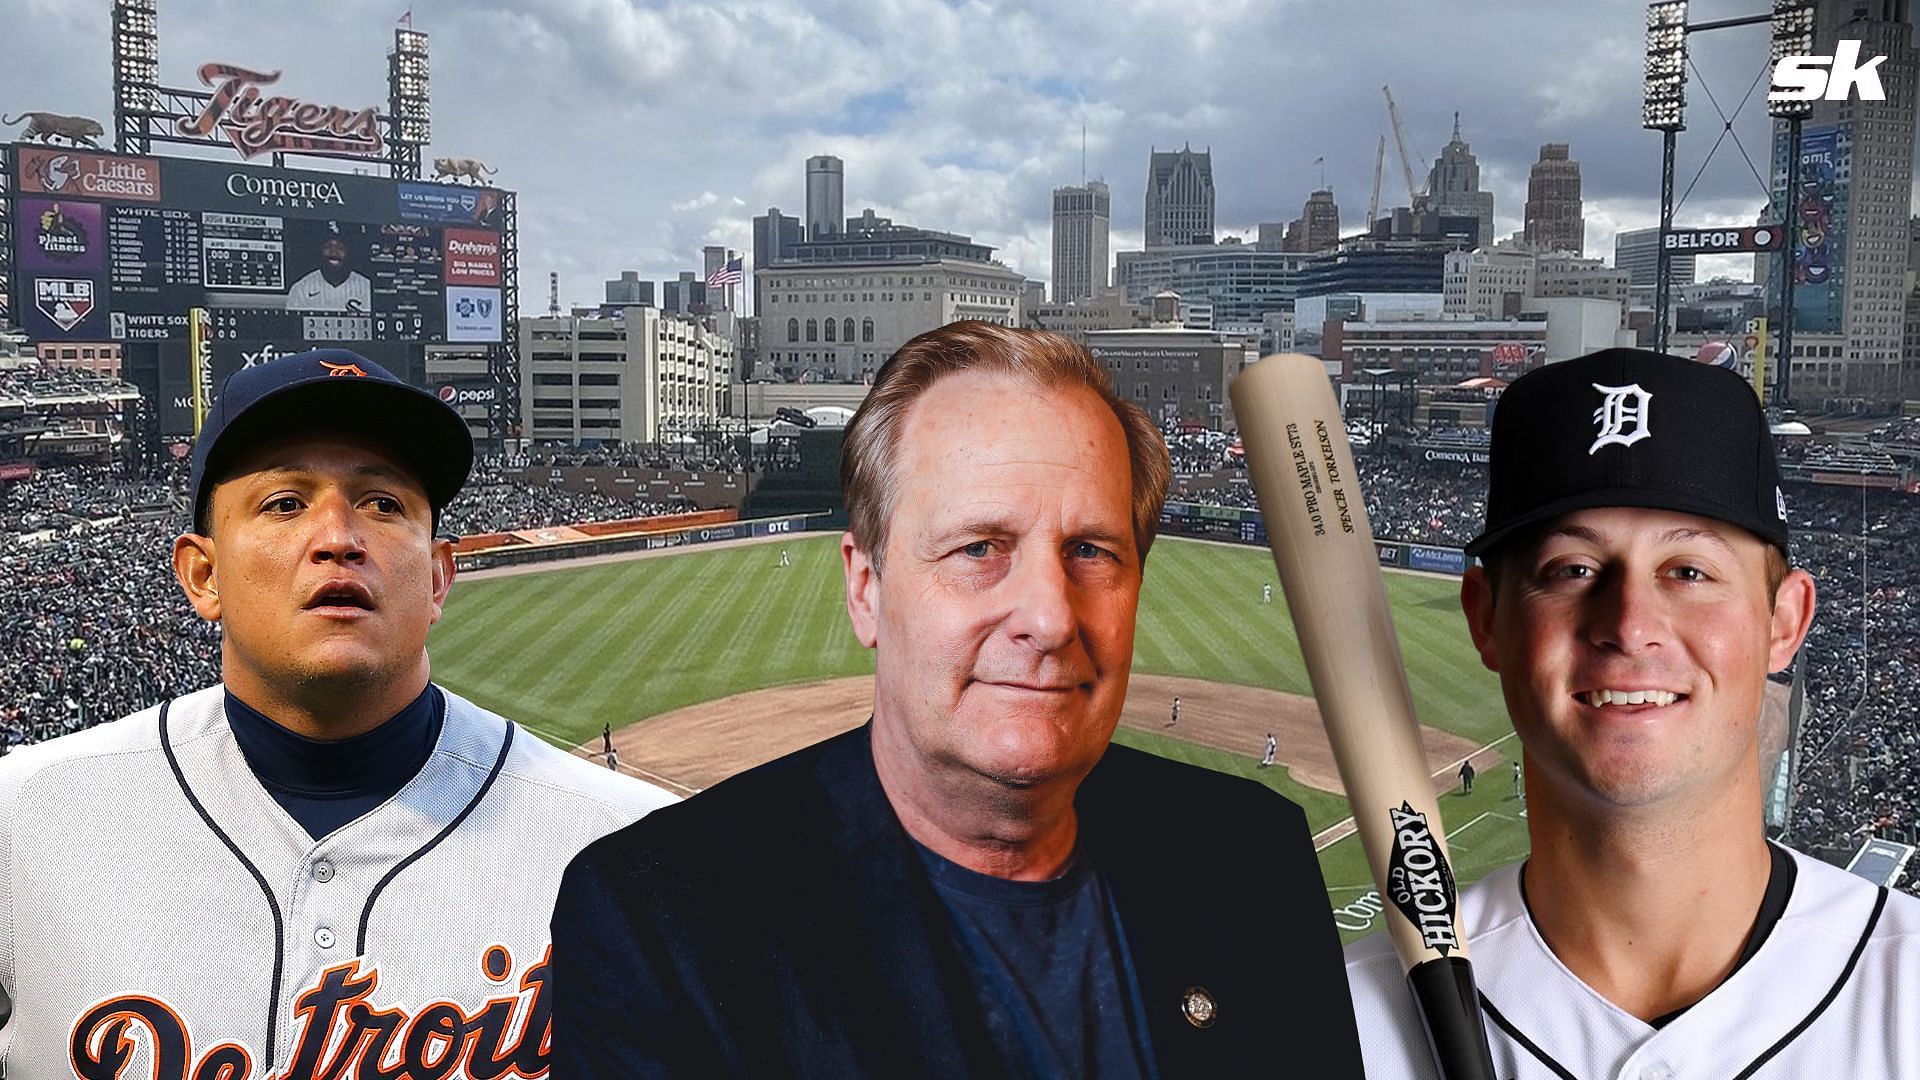 Jeff Daniels believes in the Detroit Tigers, and he thinks you should too